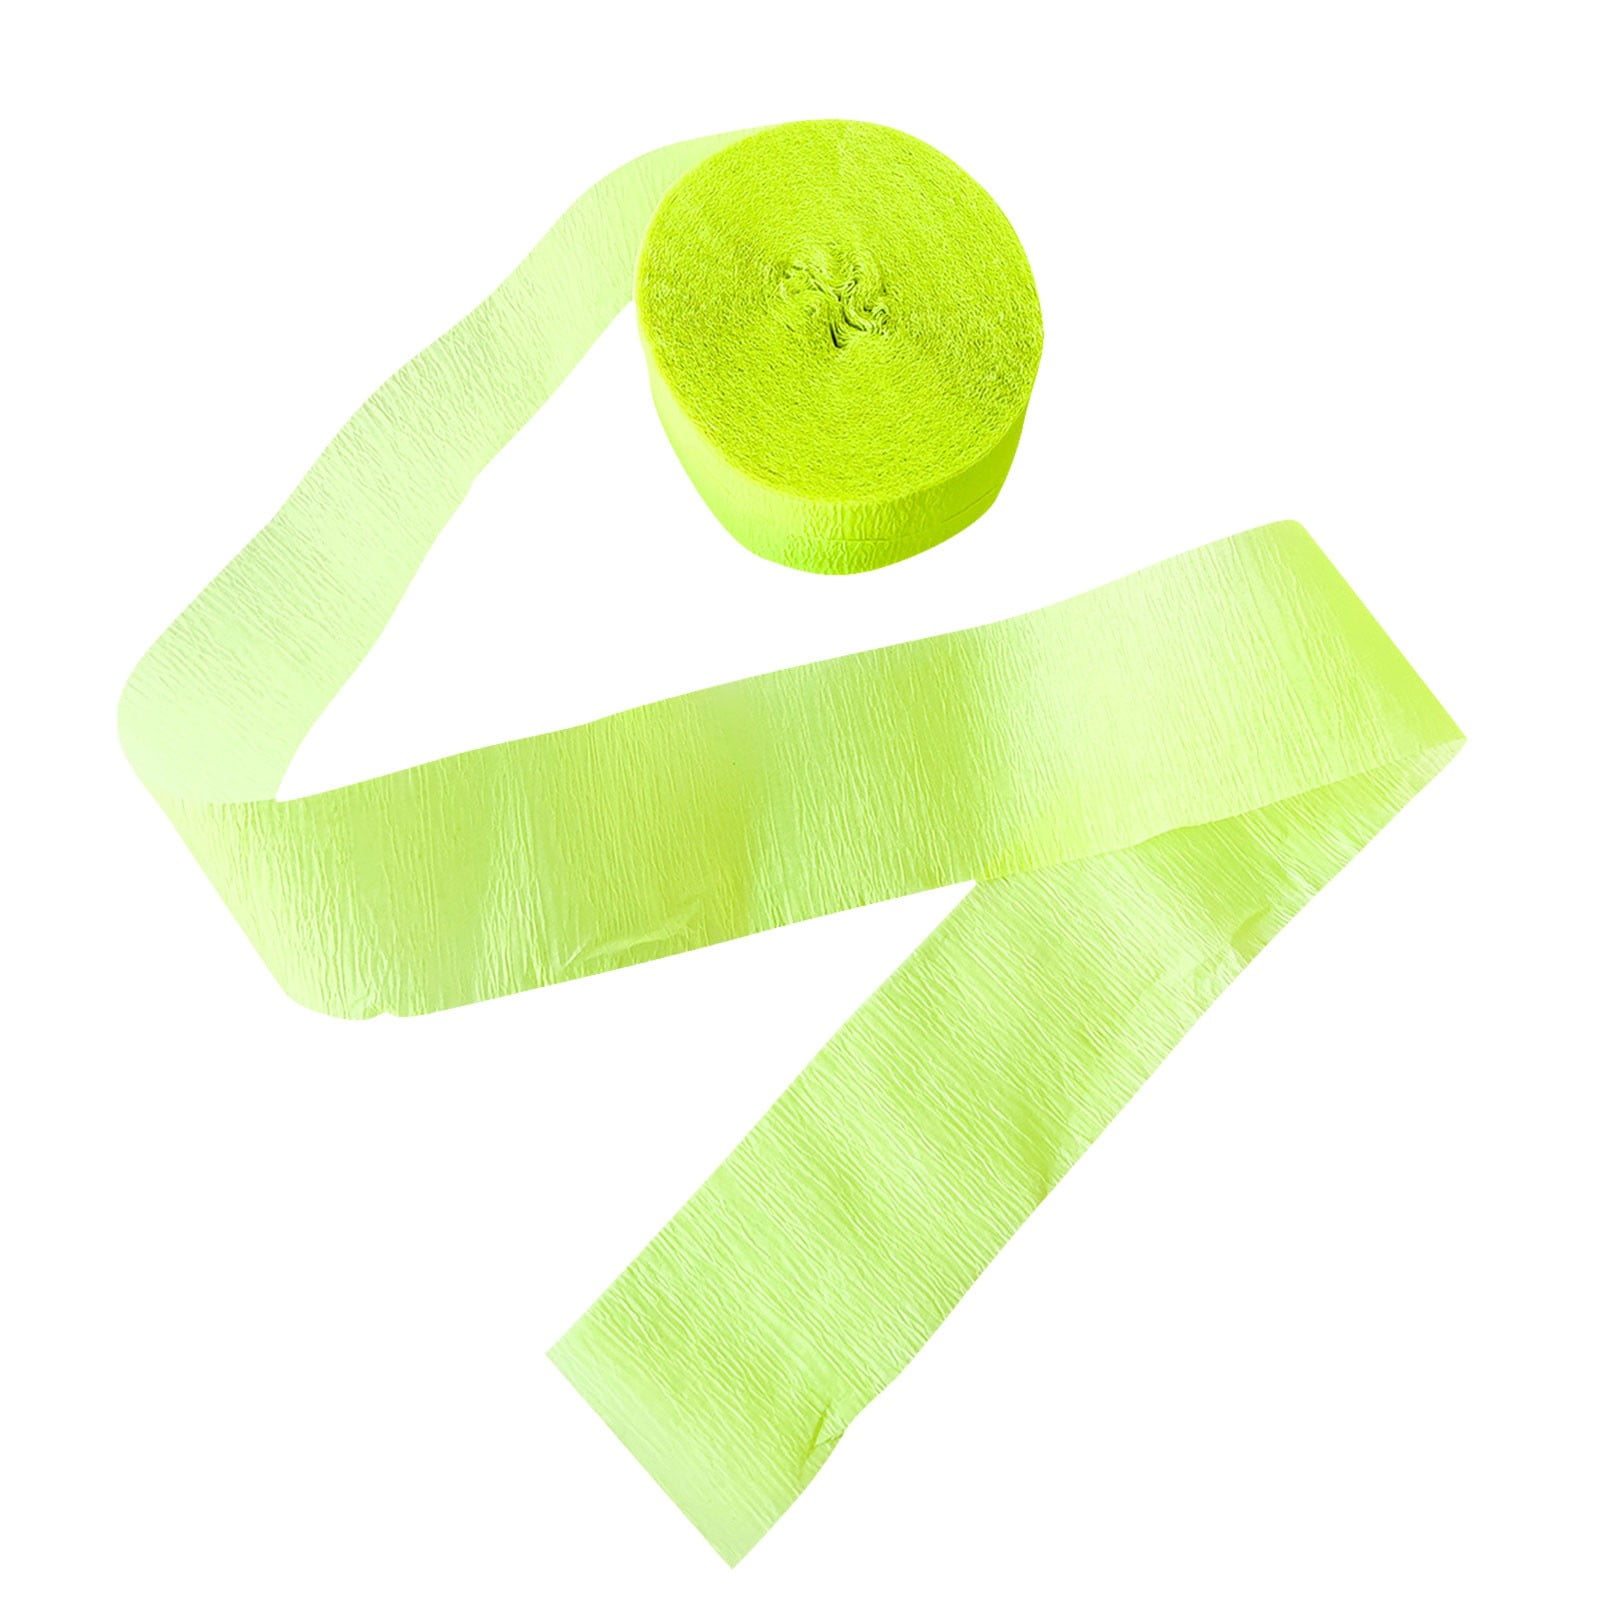 Lime Green Crepe Paper Streamers, 2 Rolls, Made in USA